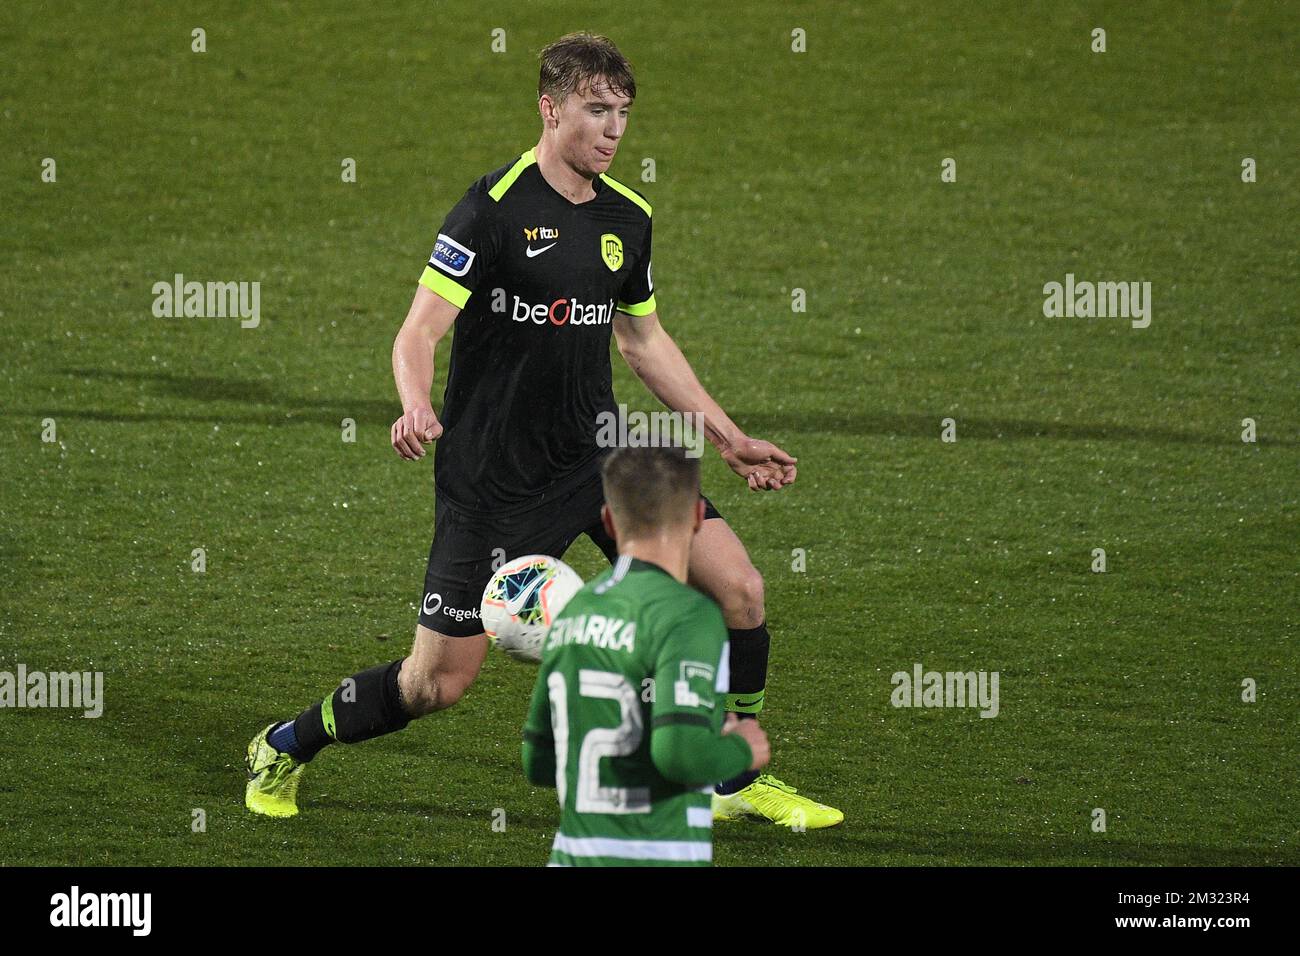 Genk's Kristian Thorstvedt pictured in action during a friendly soccer match between KRC Genk and Hungarian club Ferencvarosi Torna Club, during their winter training camps, Friday 10 January 2020 in La Nucia, Spain. BELGA PHOTO YORICK JANSENS Stock Photo